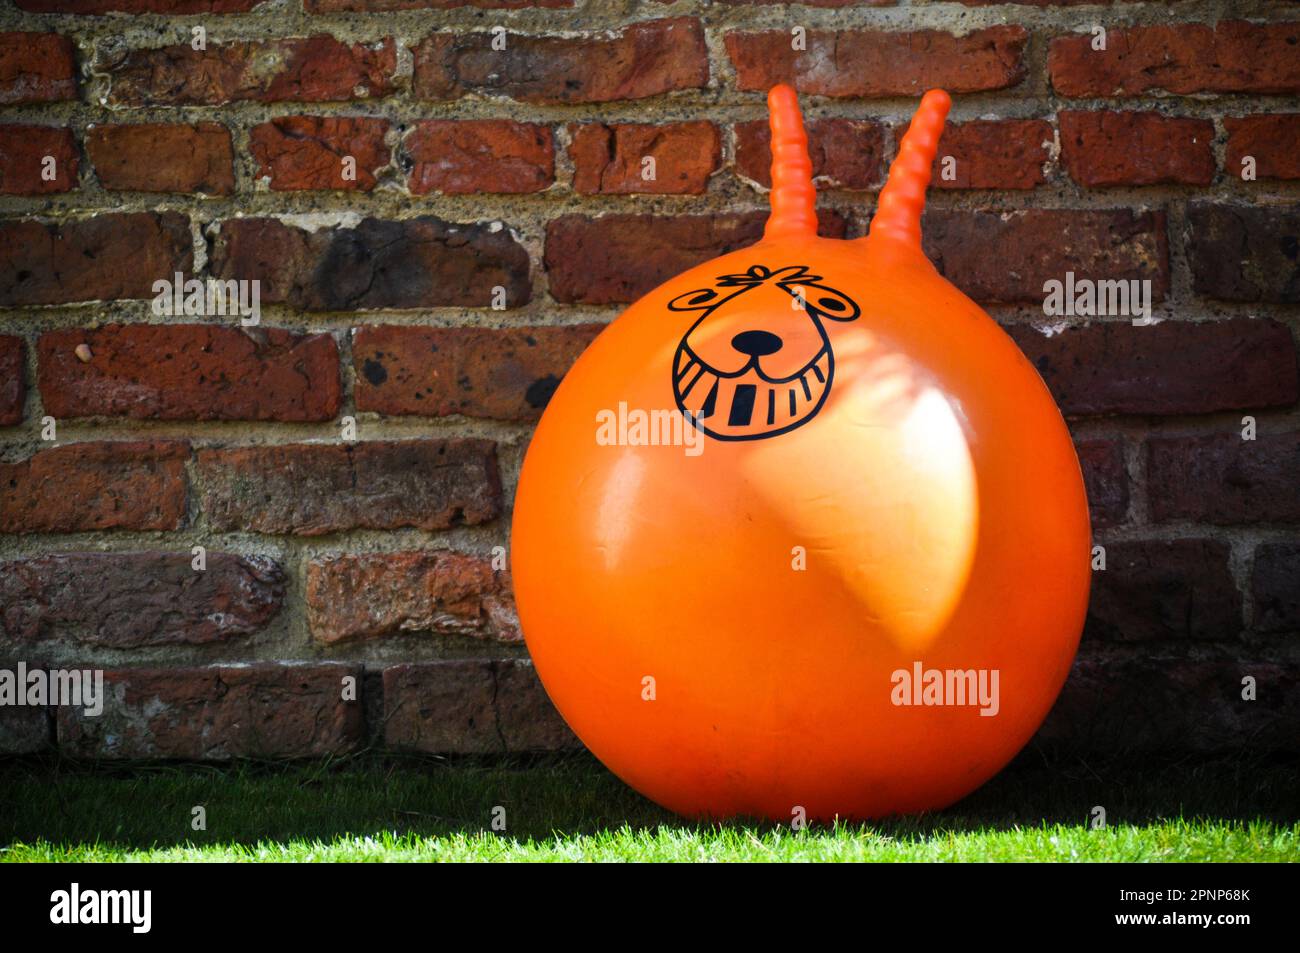 An orange space hopper toy propped against a rustic brick wall with copy space to the side Stock Photo